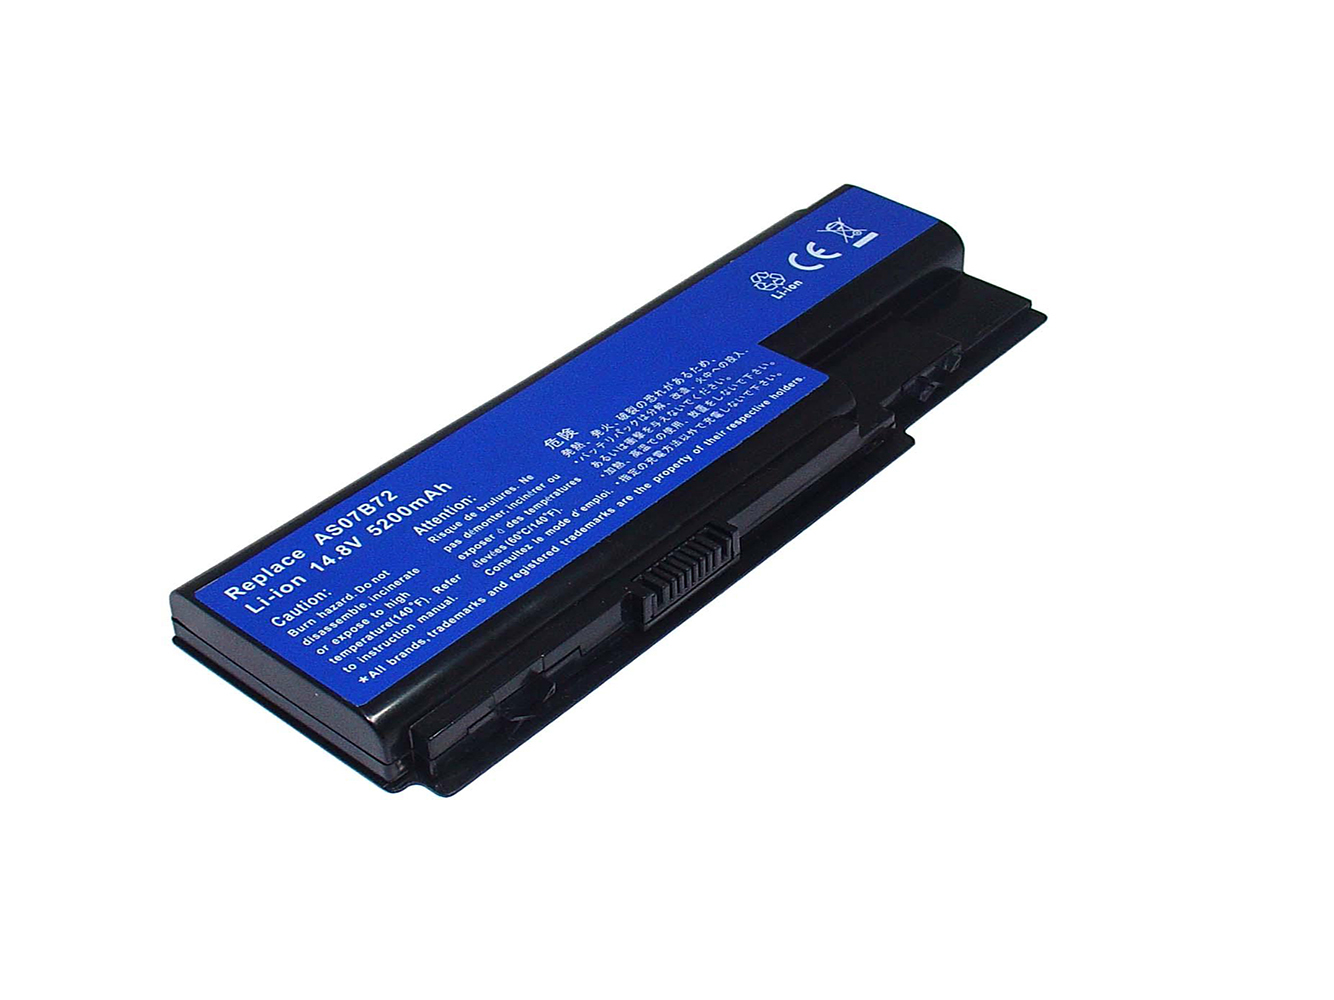 Acer Ak.008bt.055, As07b32 Laptop Batteries For Acer Aspire 7520-5115, Acer Aspire 7520-5618 replacement